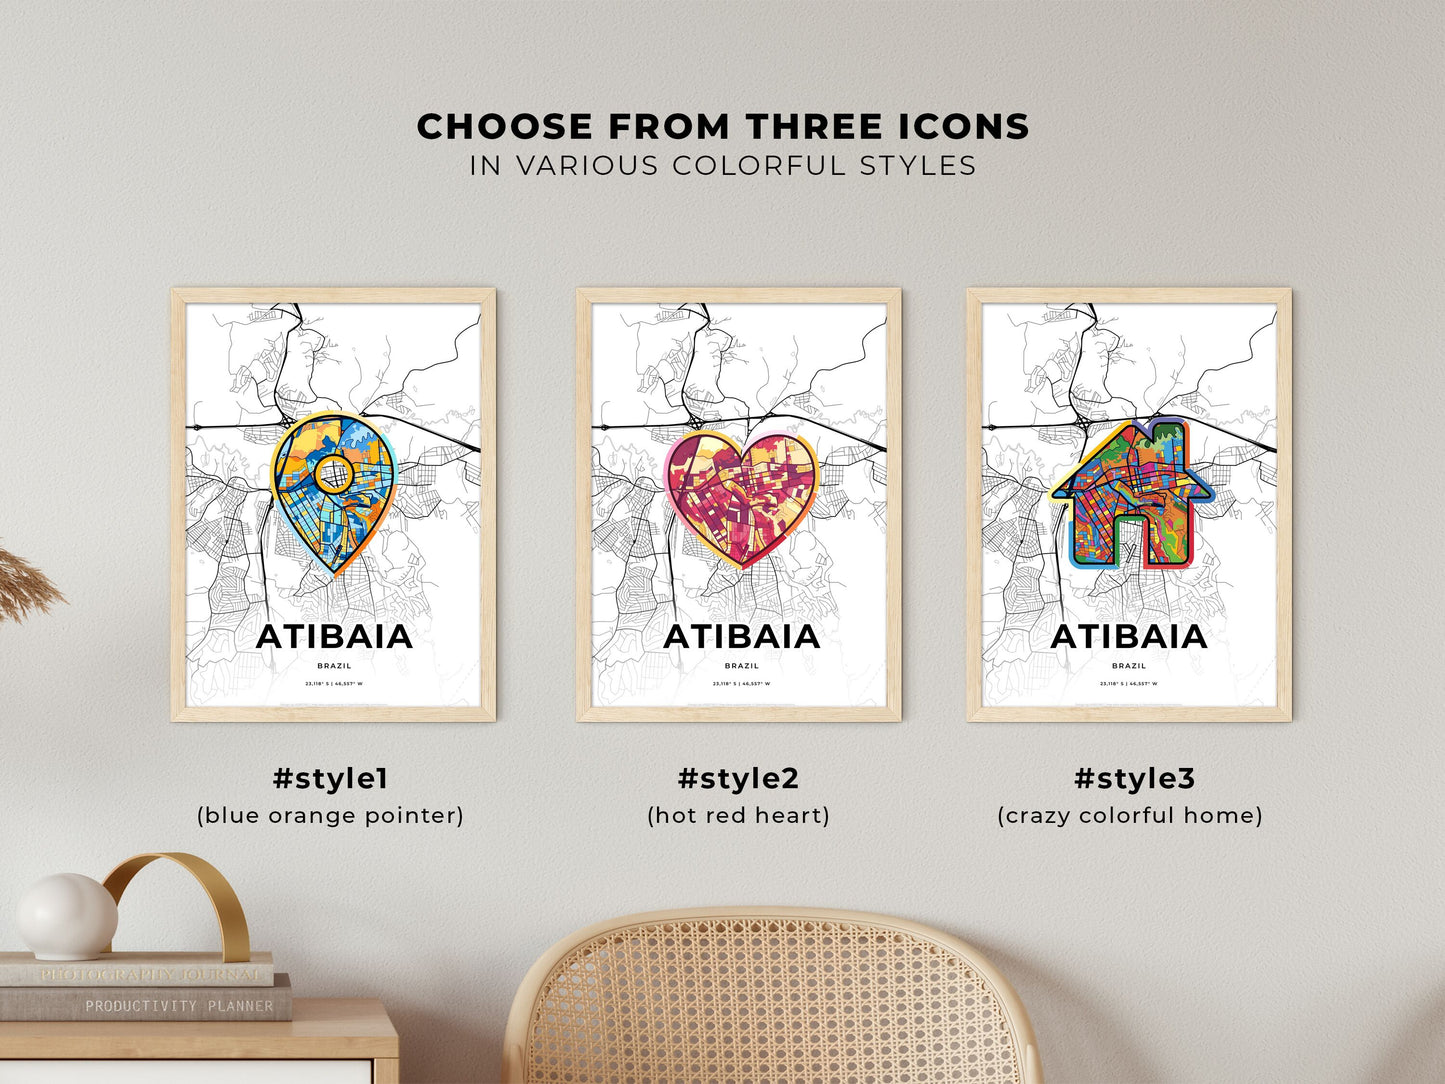 ATIBAIA BRAZIL minimal art map with a colorful icon. Where it all began, Couple map gift.